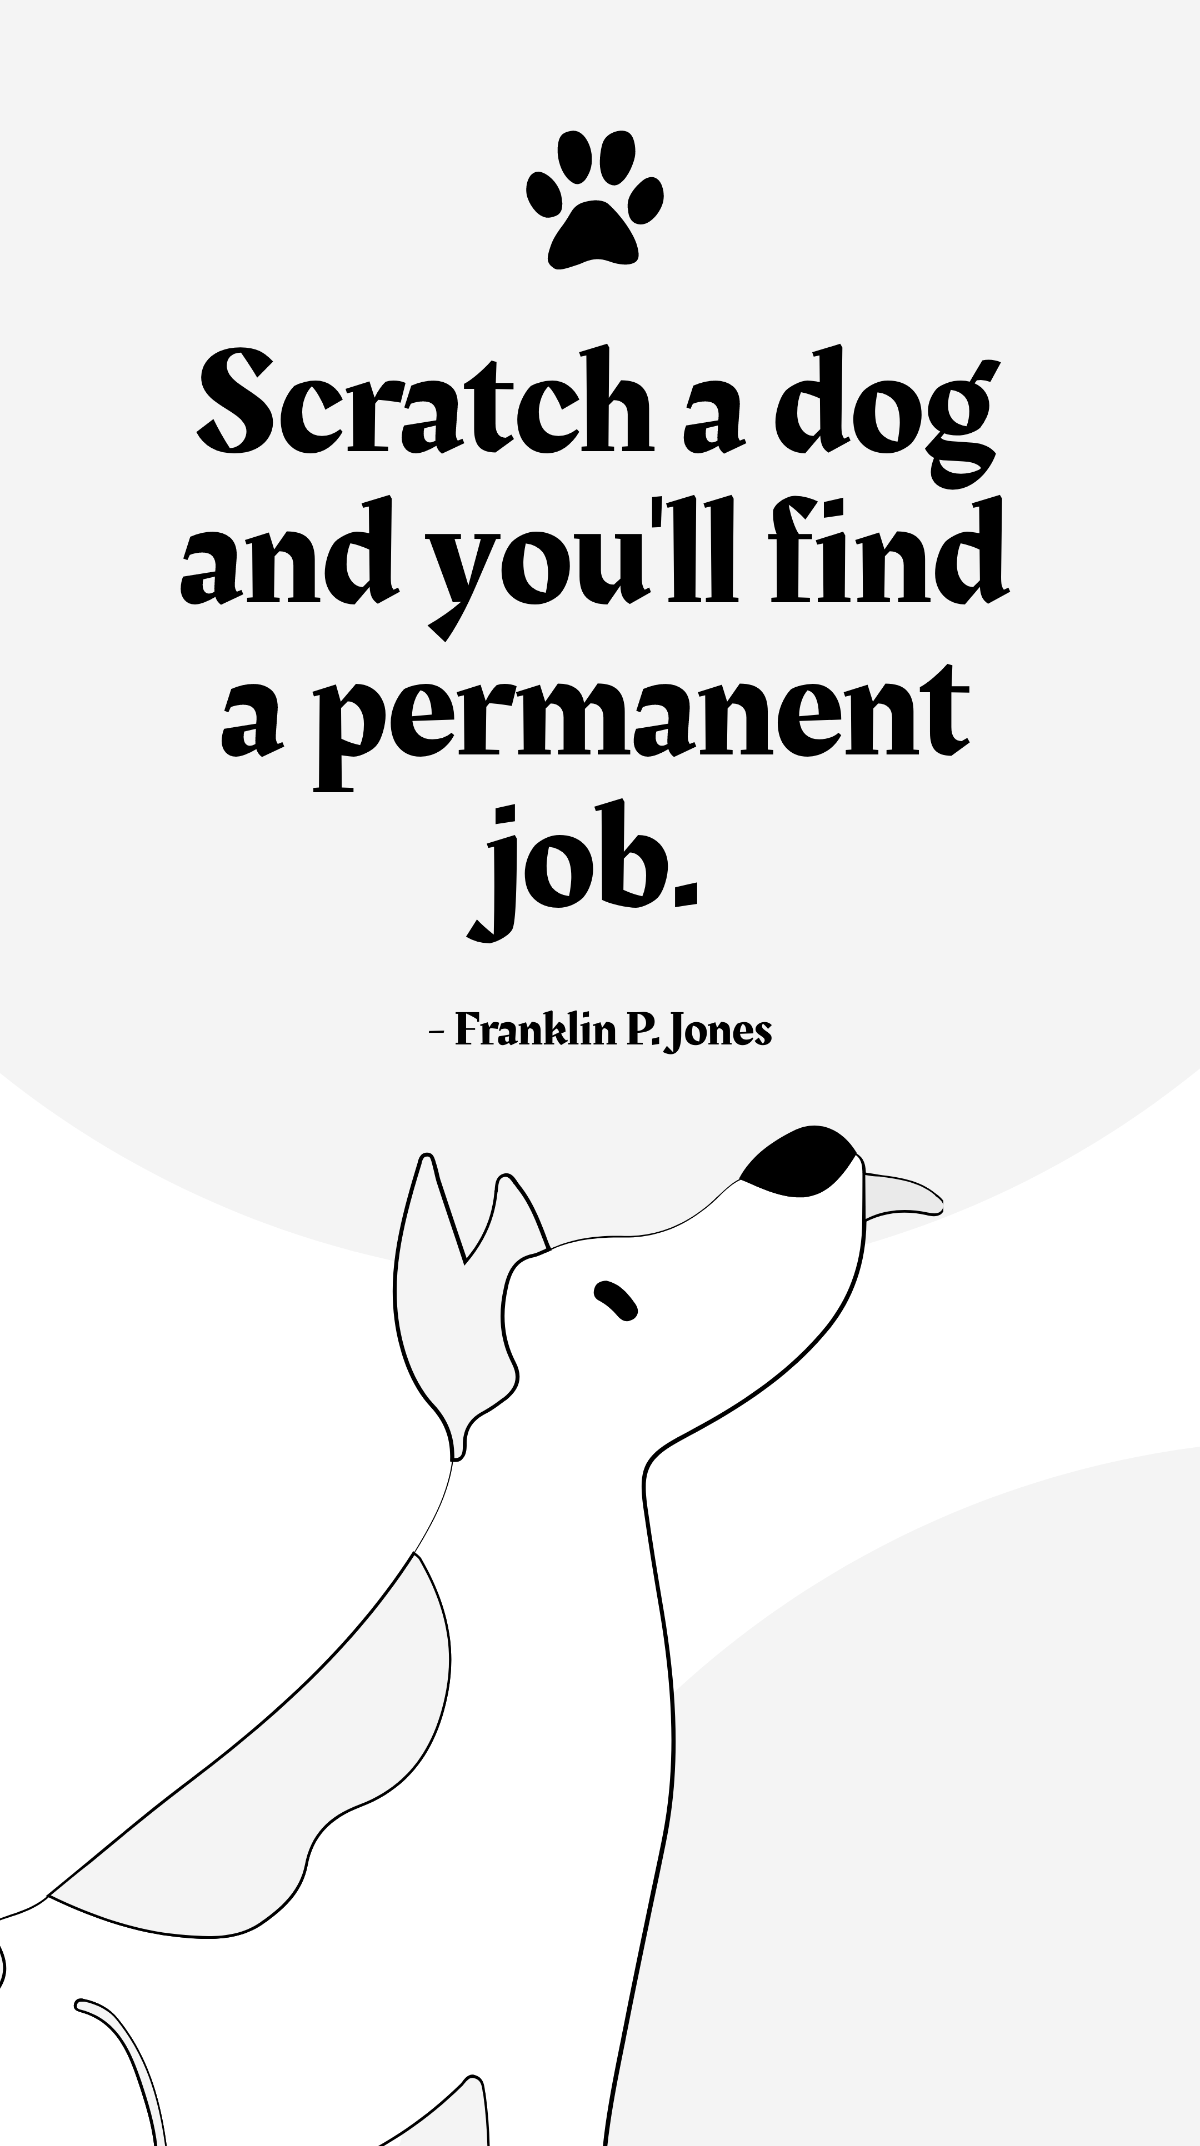 Free Franklin P. Jones - Scratch a dog and you'll find a permanent job. Template